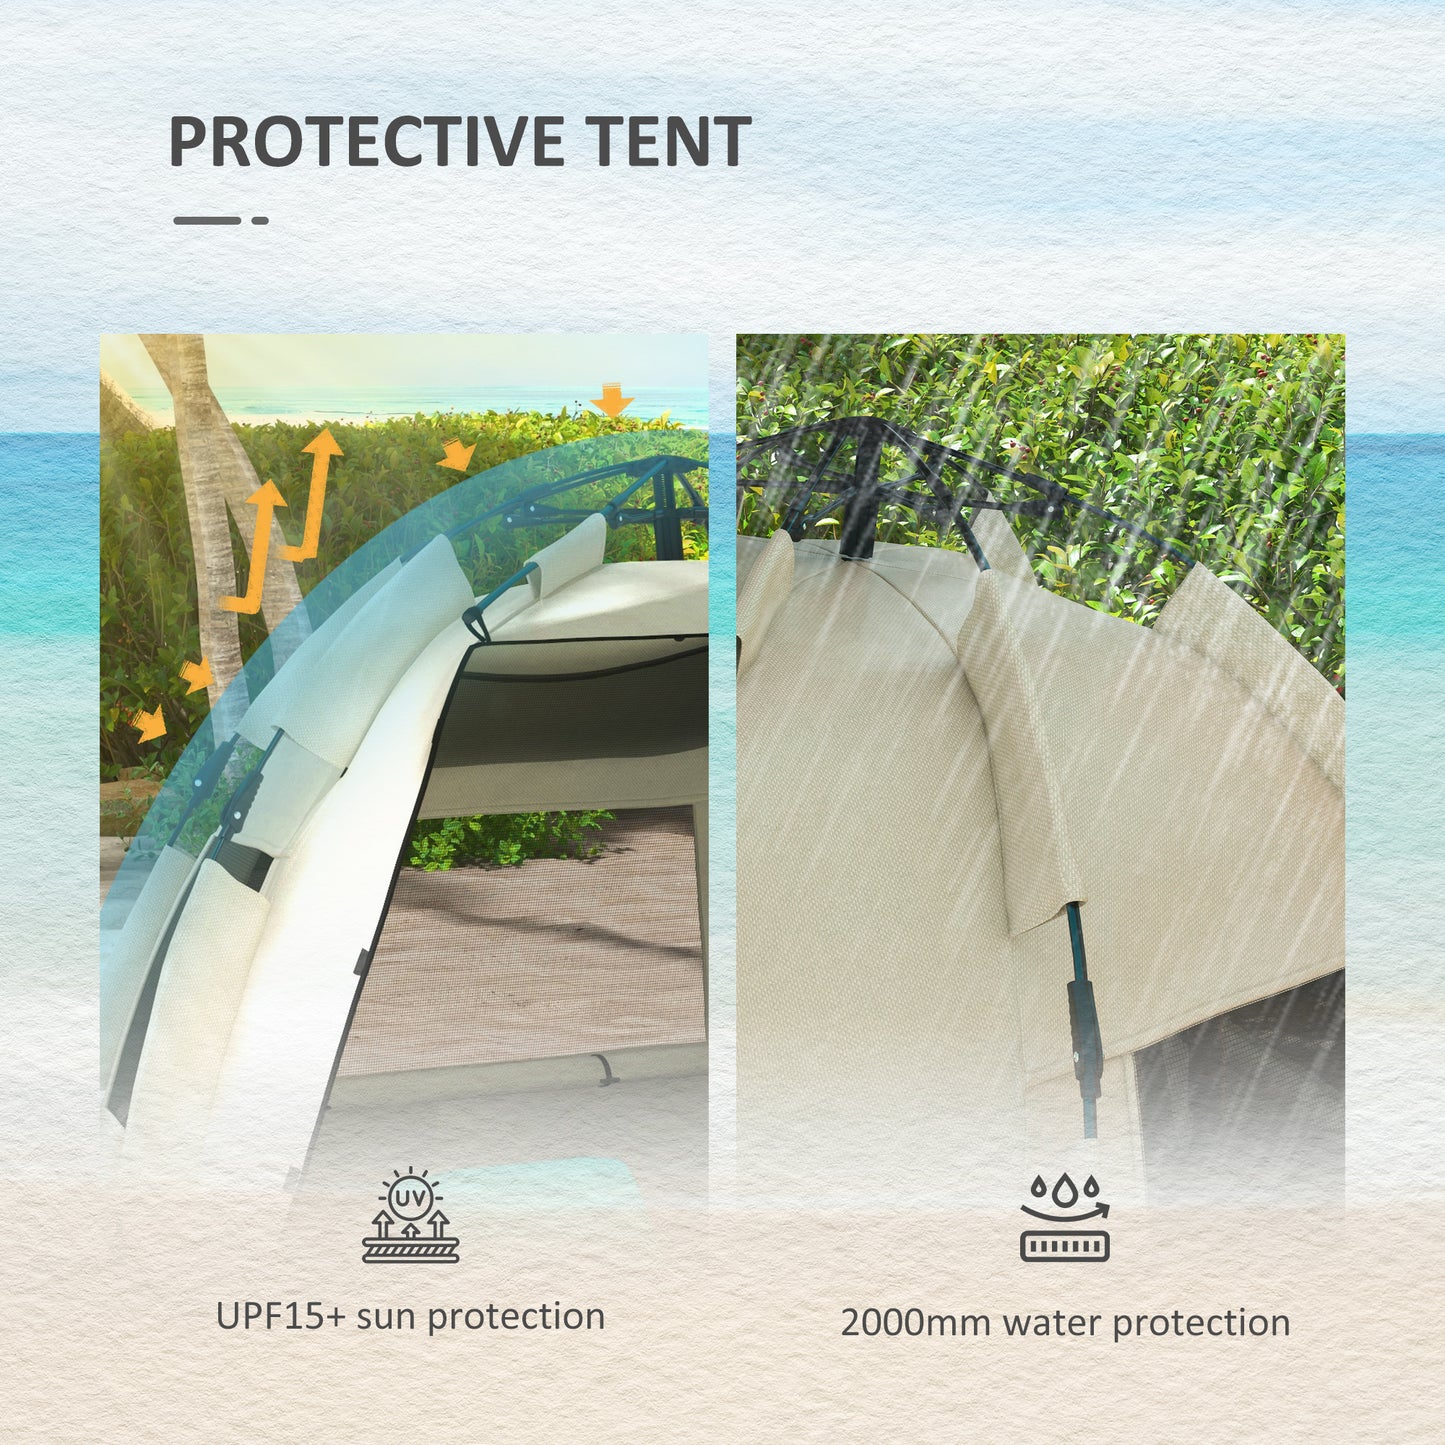 Outsunny Three-Man UPF15+ Beach Tent with Extended Floor - Green